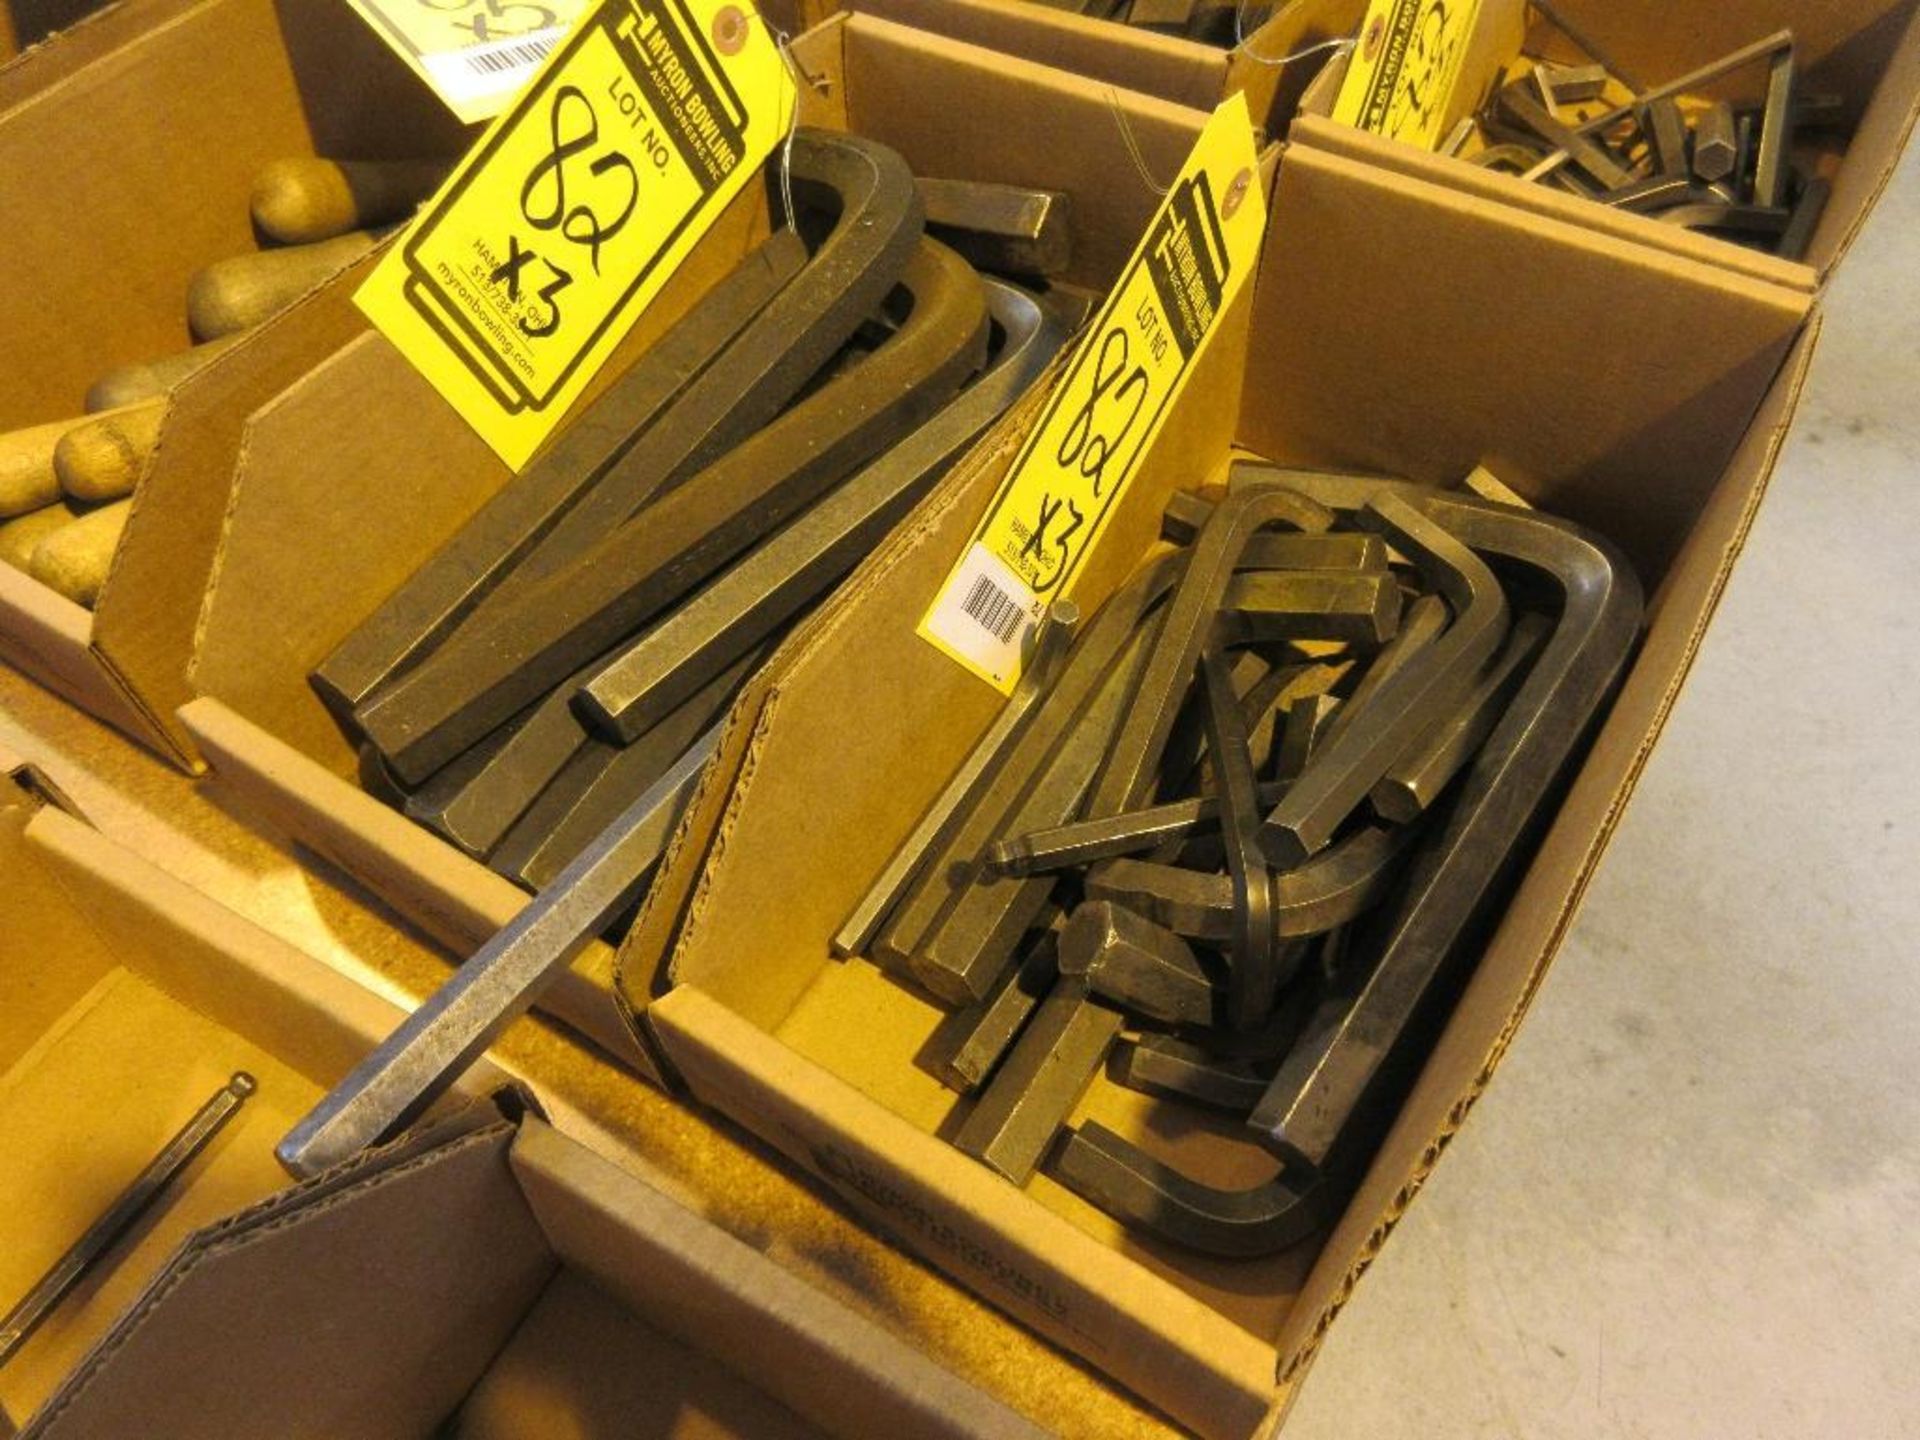 (3) BOXES OF ALLEN WRENCHES